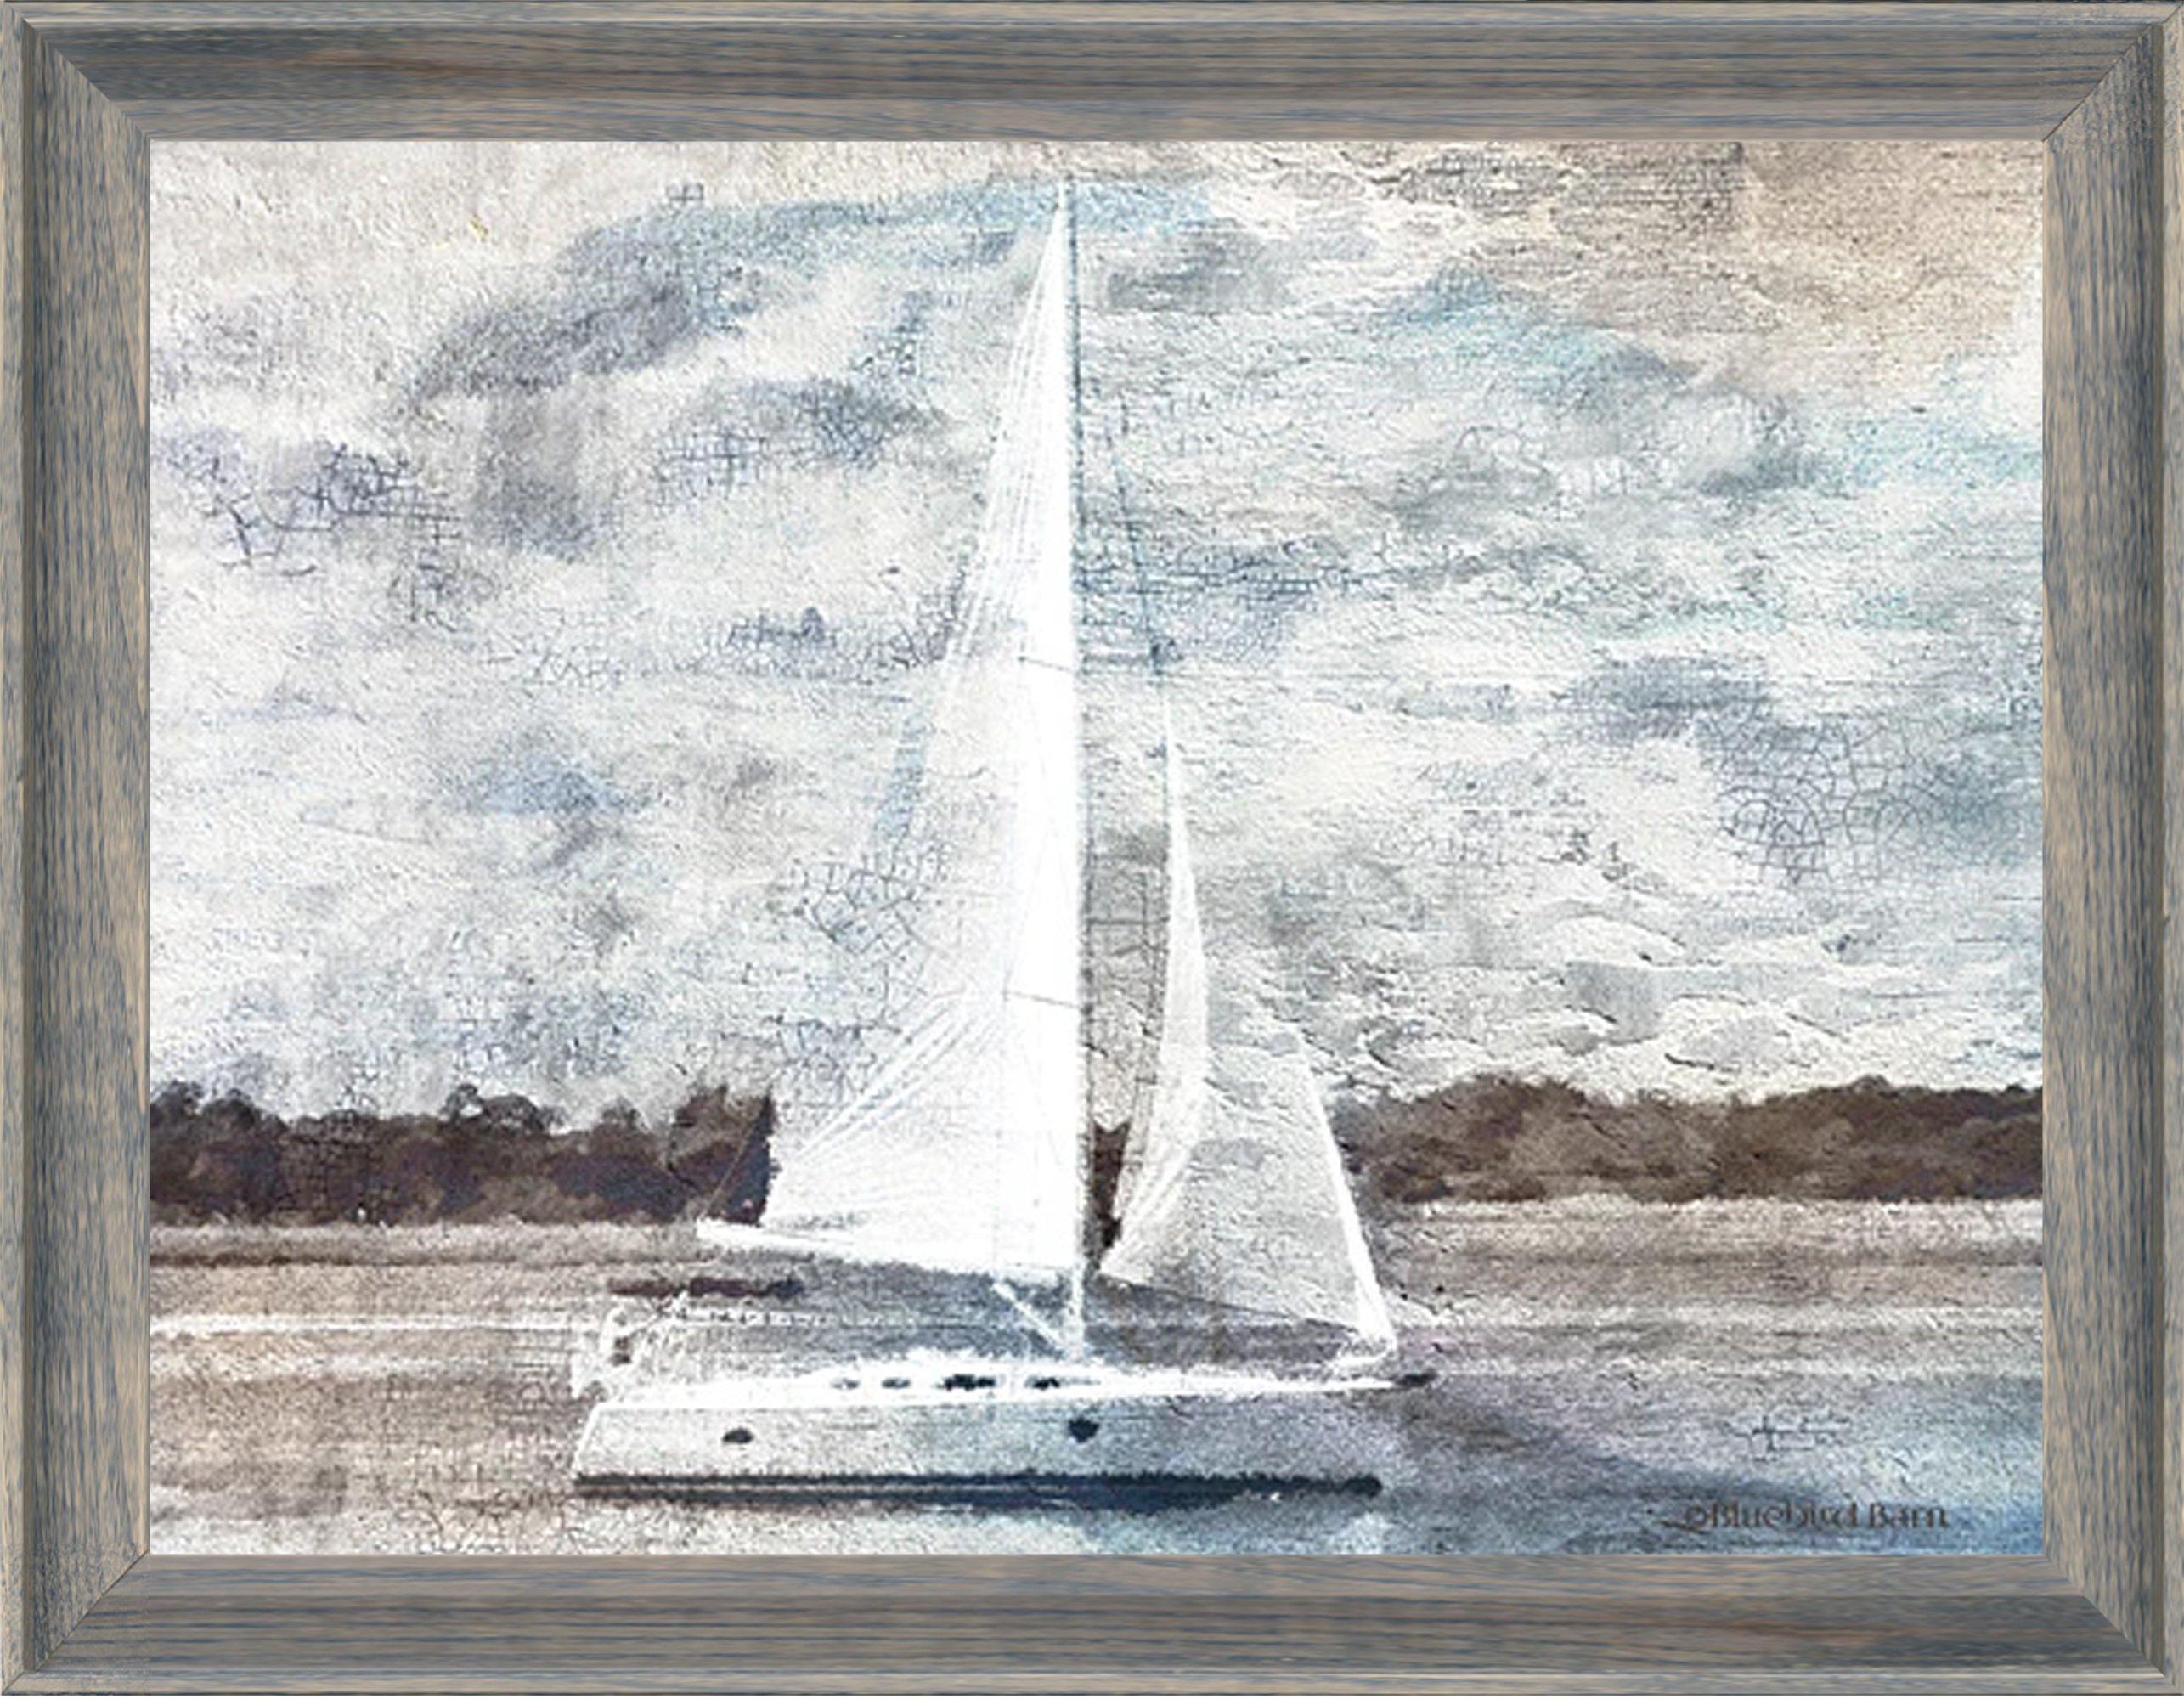 12X16 SAILBOAT ON THE WATER Wall Art